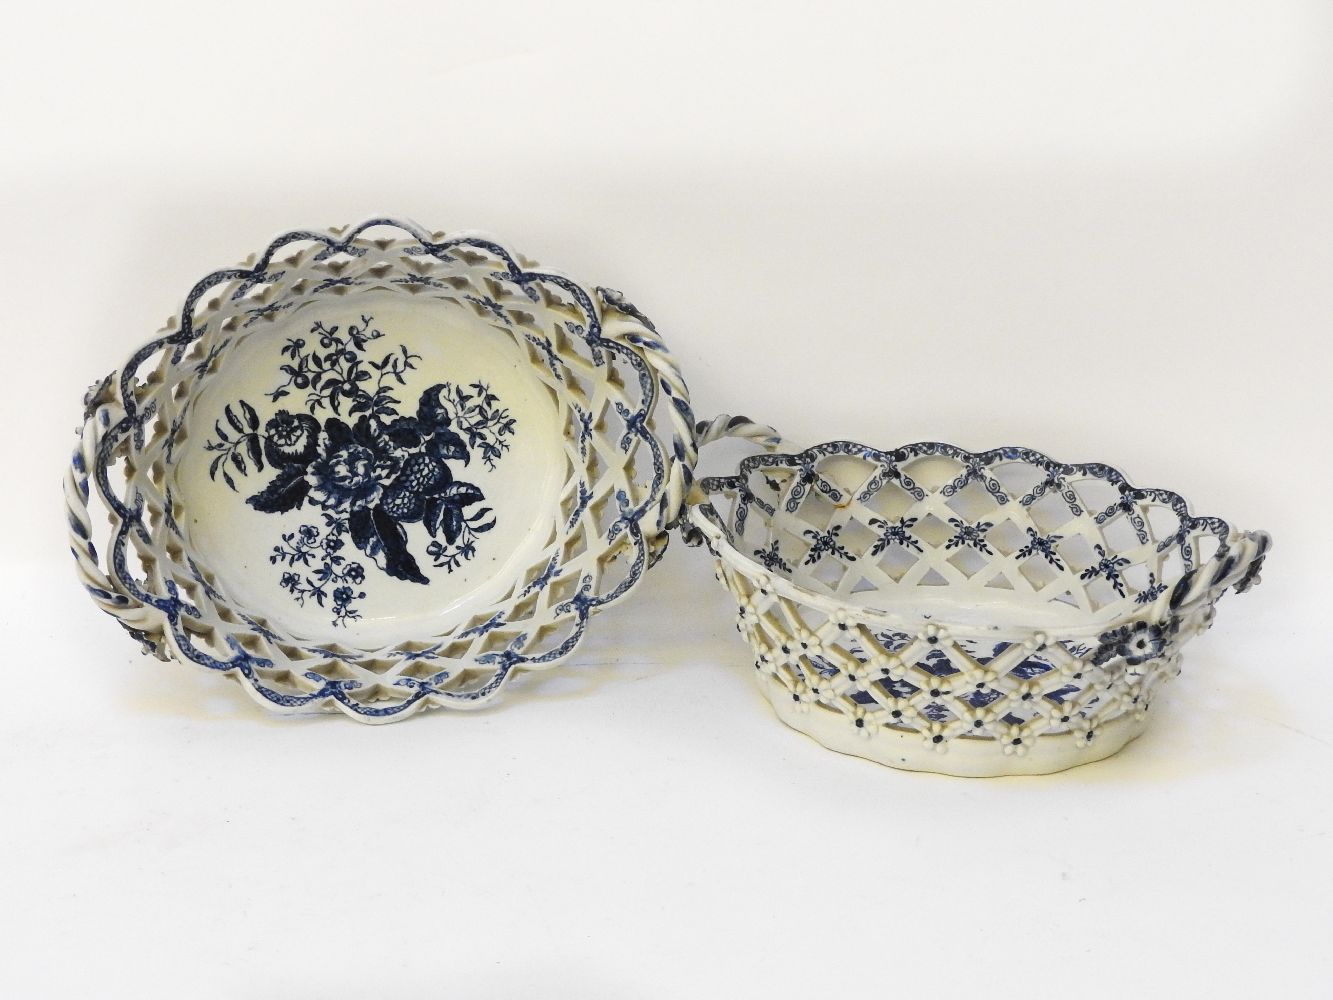 A near pair of 18th century Worcester porcelain basket, pierced lattice sides and twisted handle